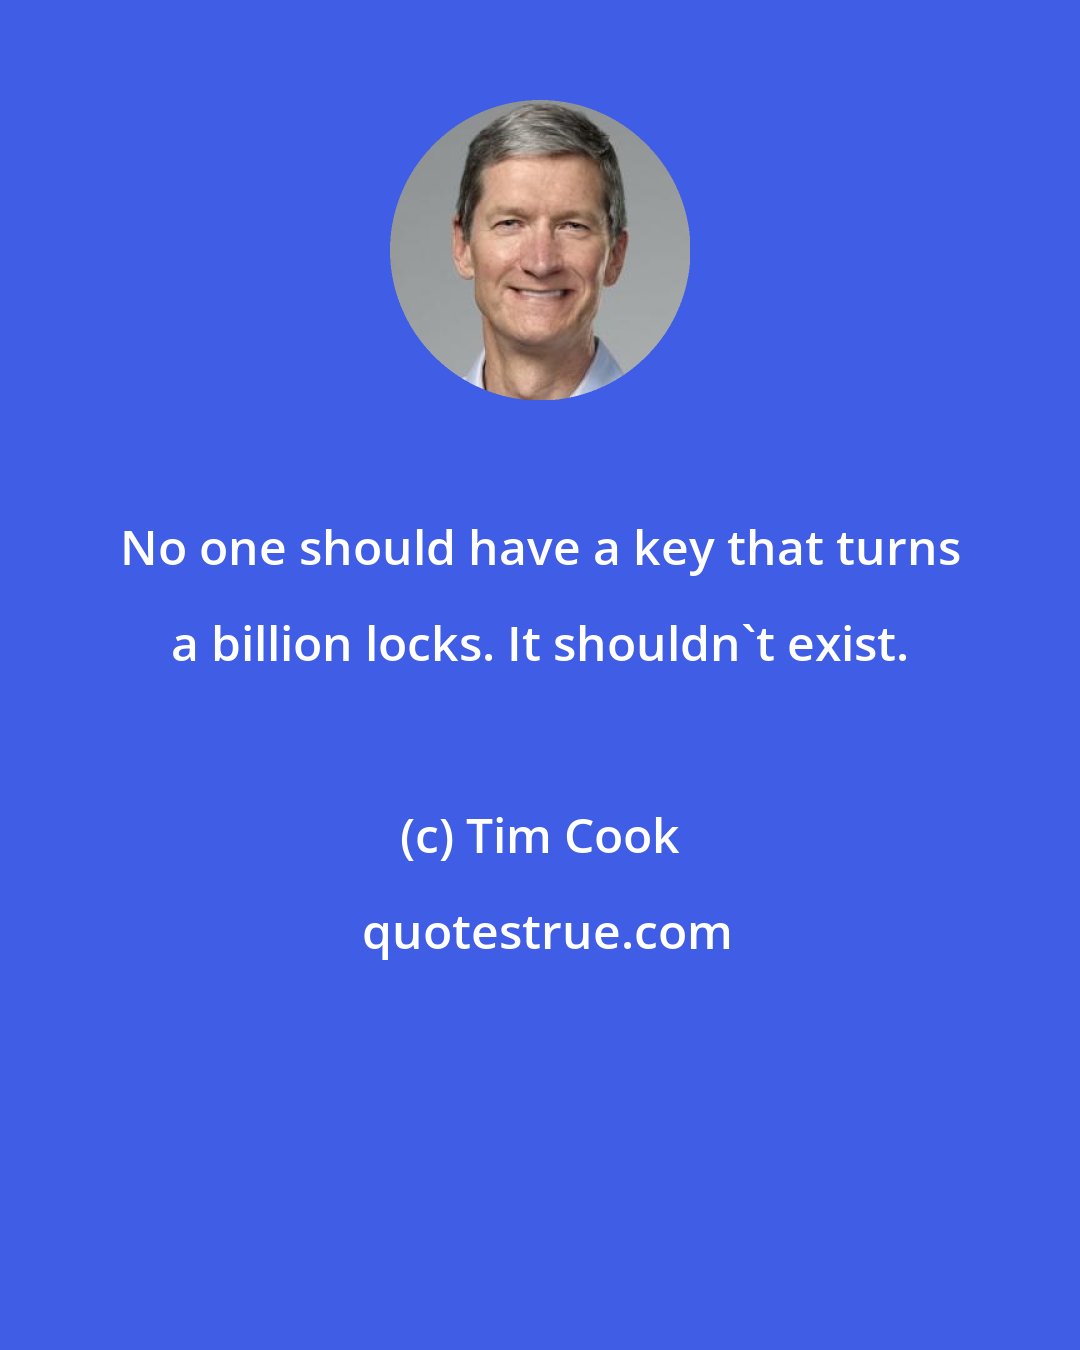 Tim Cook: No one should have a key that turns a billion locks. It shouldn't exist.